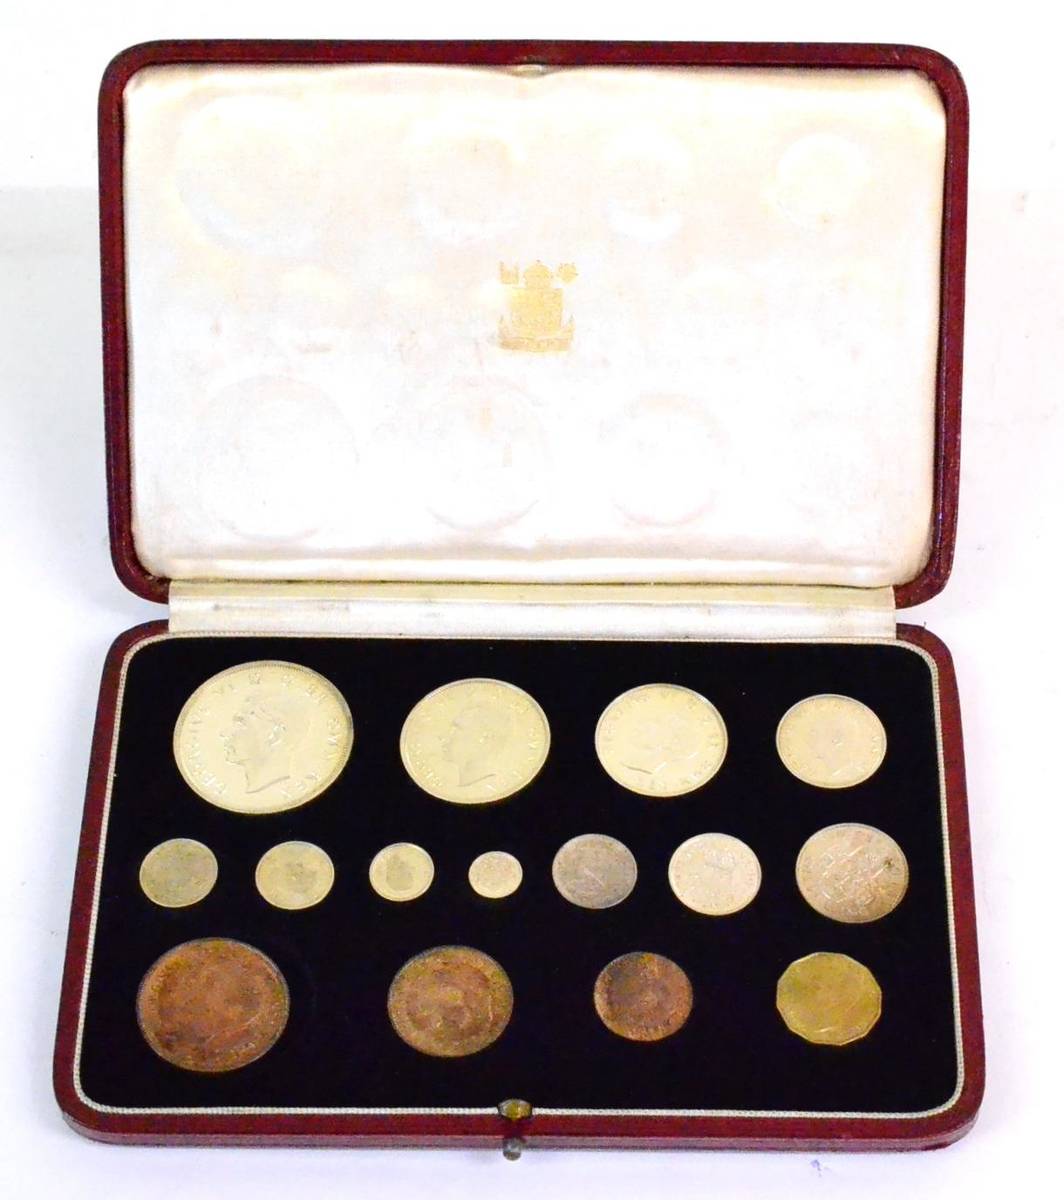 Lot 66 - Proof Set 1937, 15 coins crown to farthing & Maundy set, in maroon CofI (in very good...